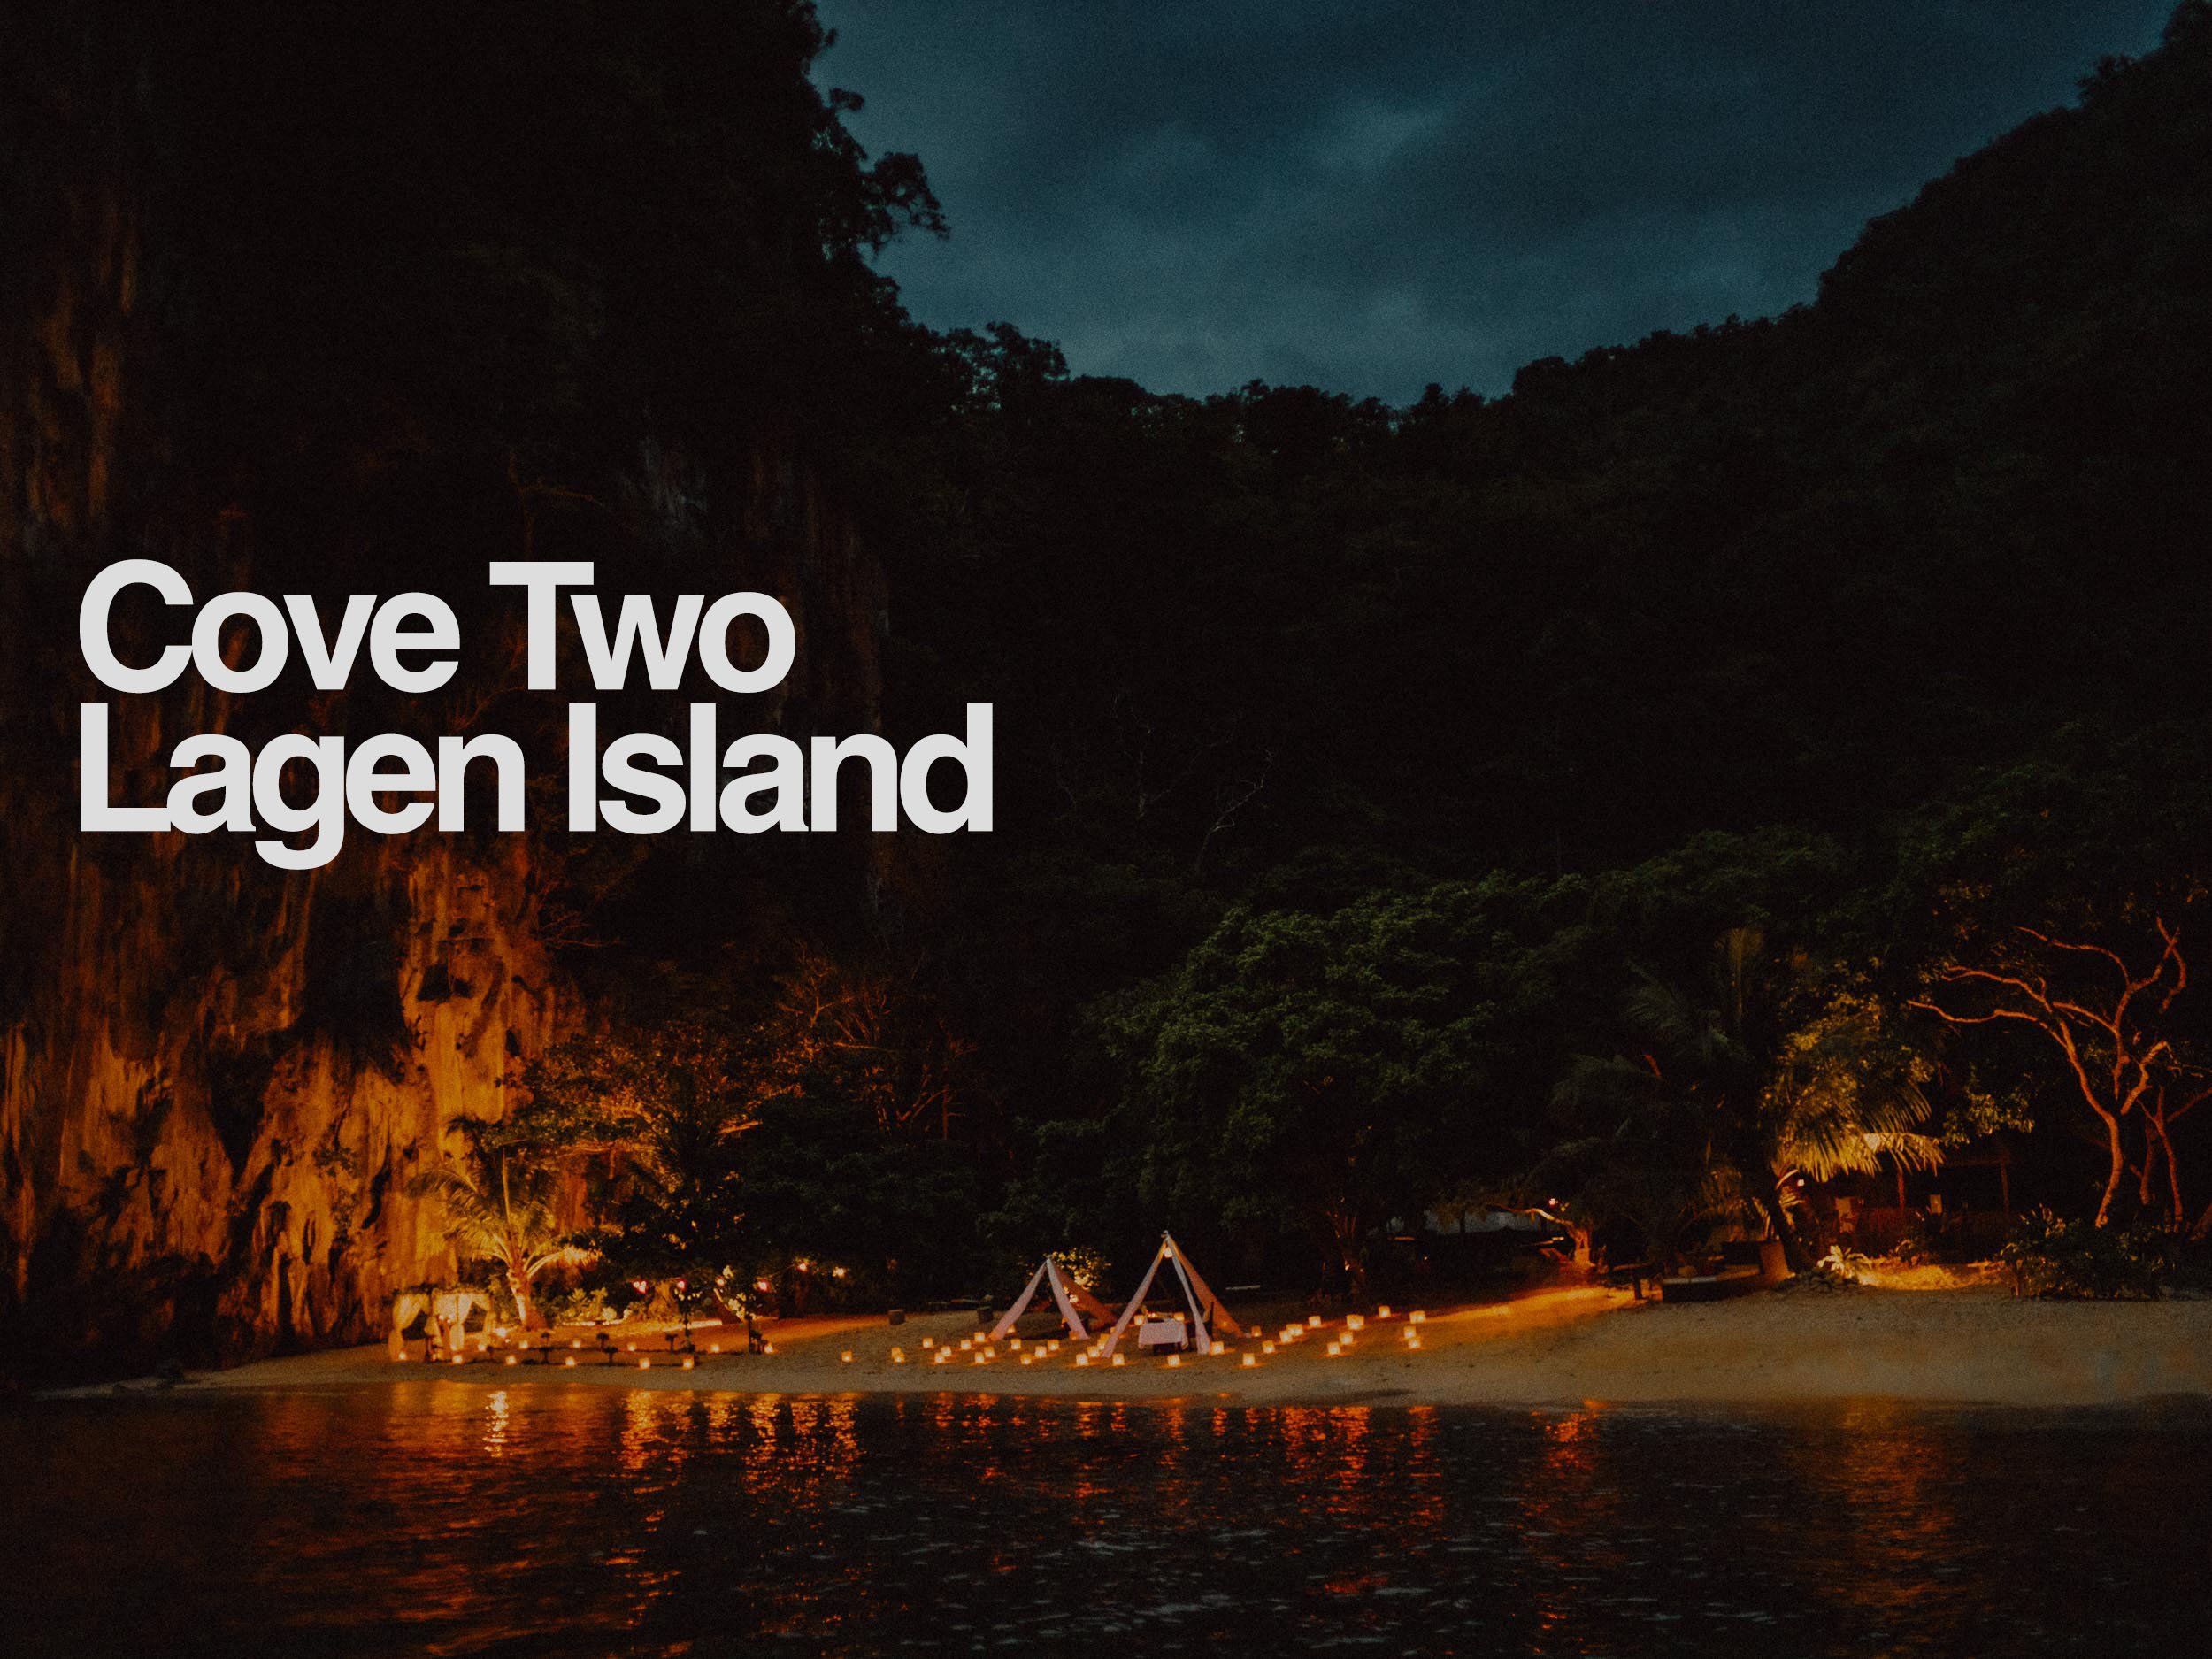 1-Lagen Island Cove 2 El Nido Resorts Palawan Philippines-A candlelit intimate dinner setup for two in Lagen Island, El Nido, Palawan, Philippines, Southeast Asia, January 2017, Sony Alpha.jpg